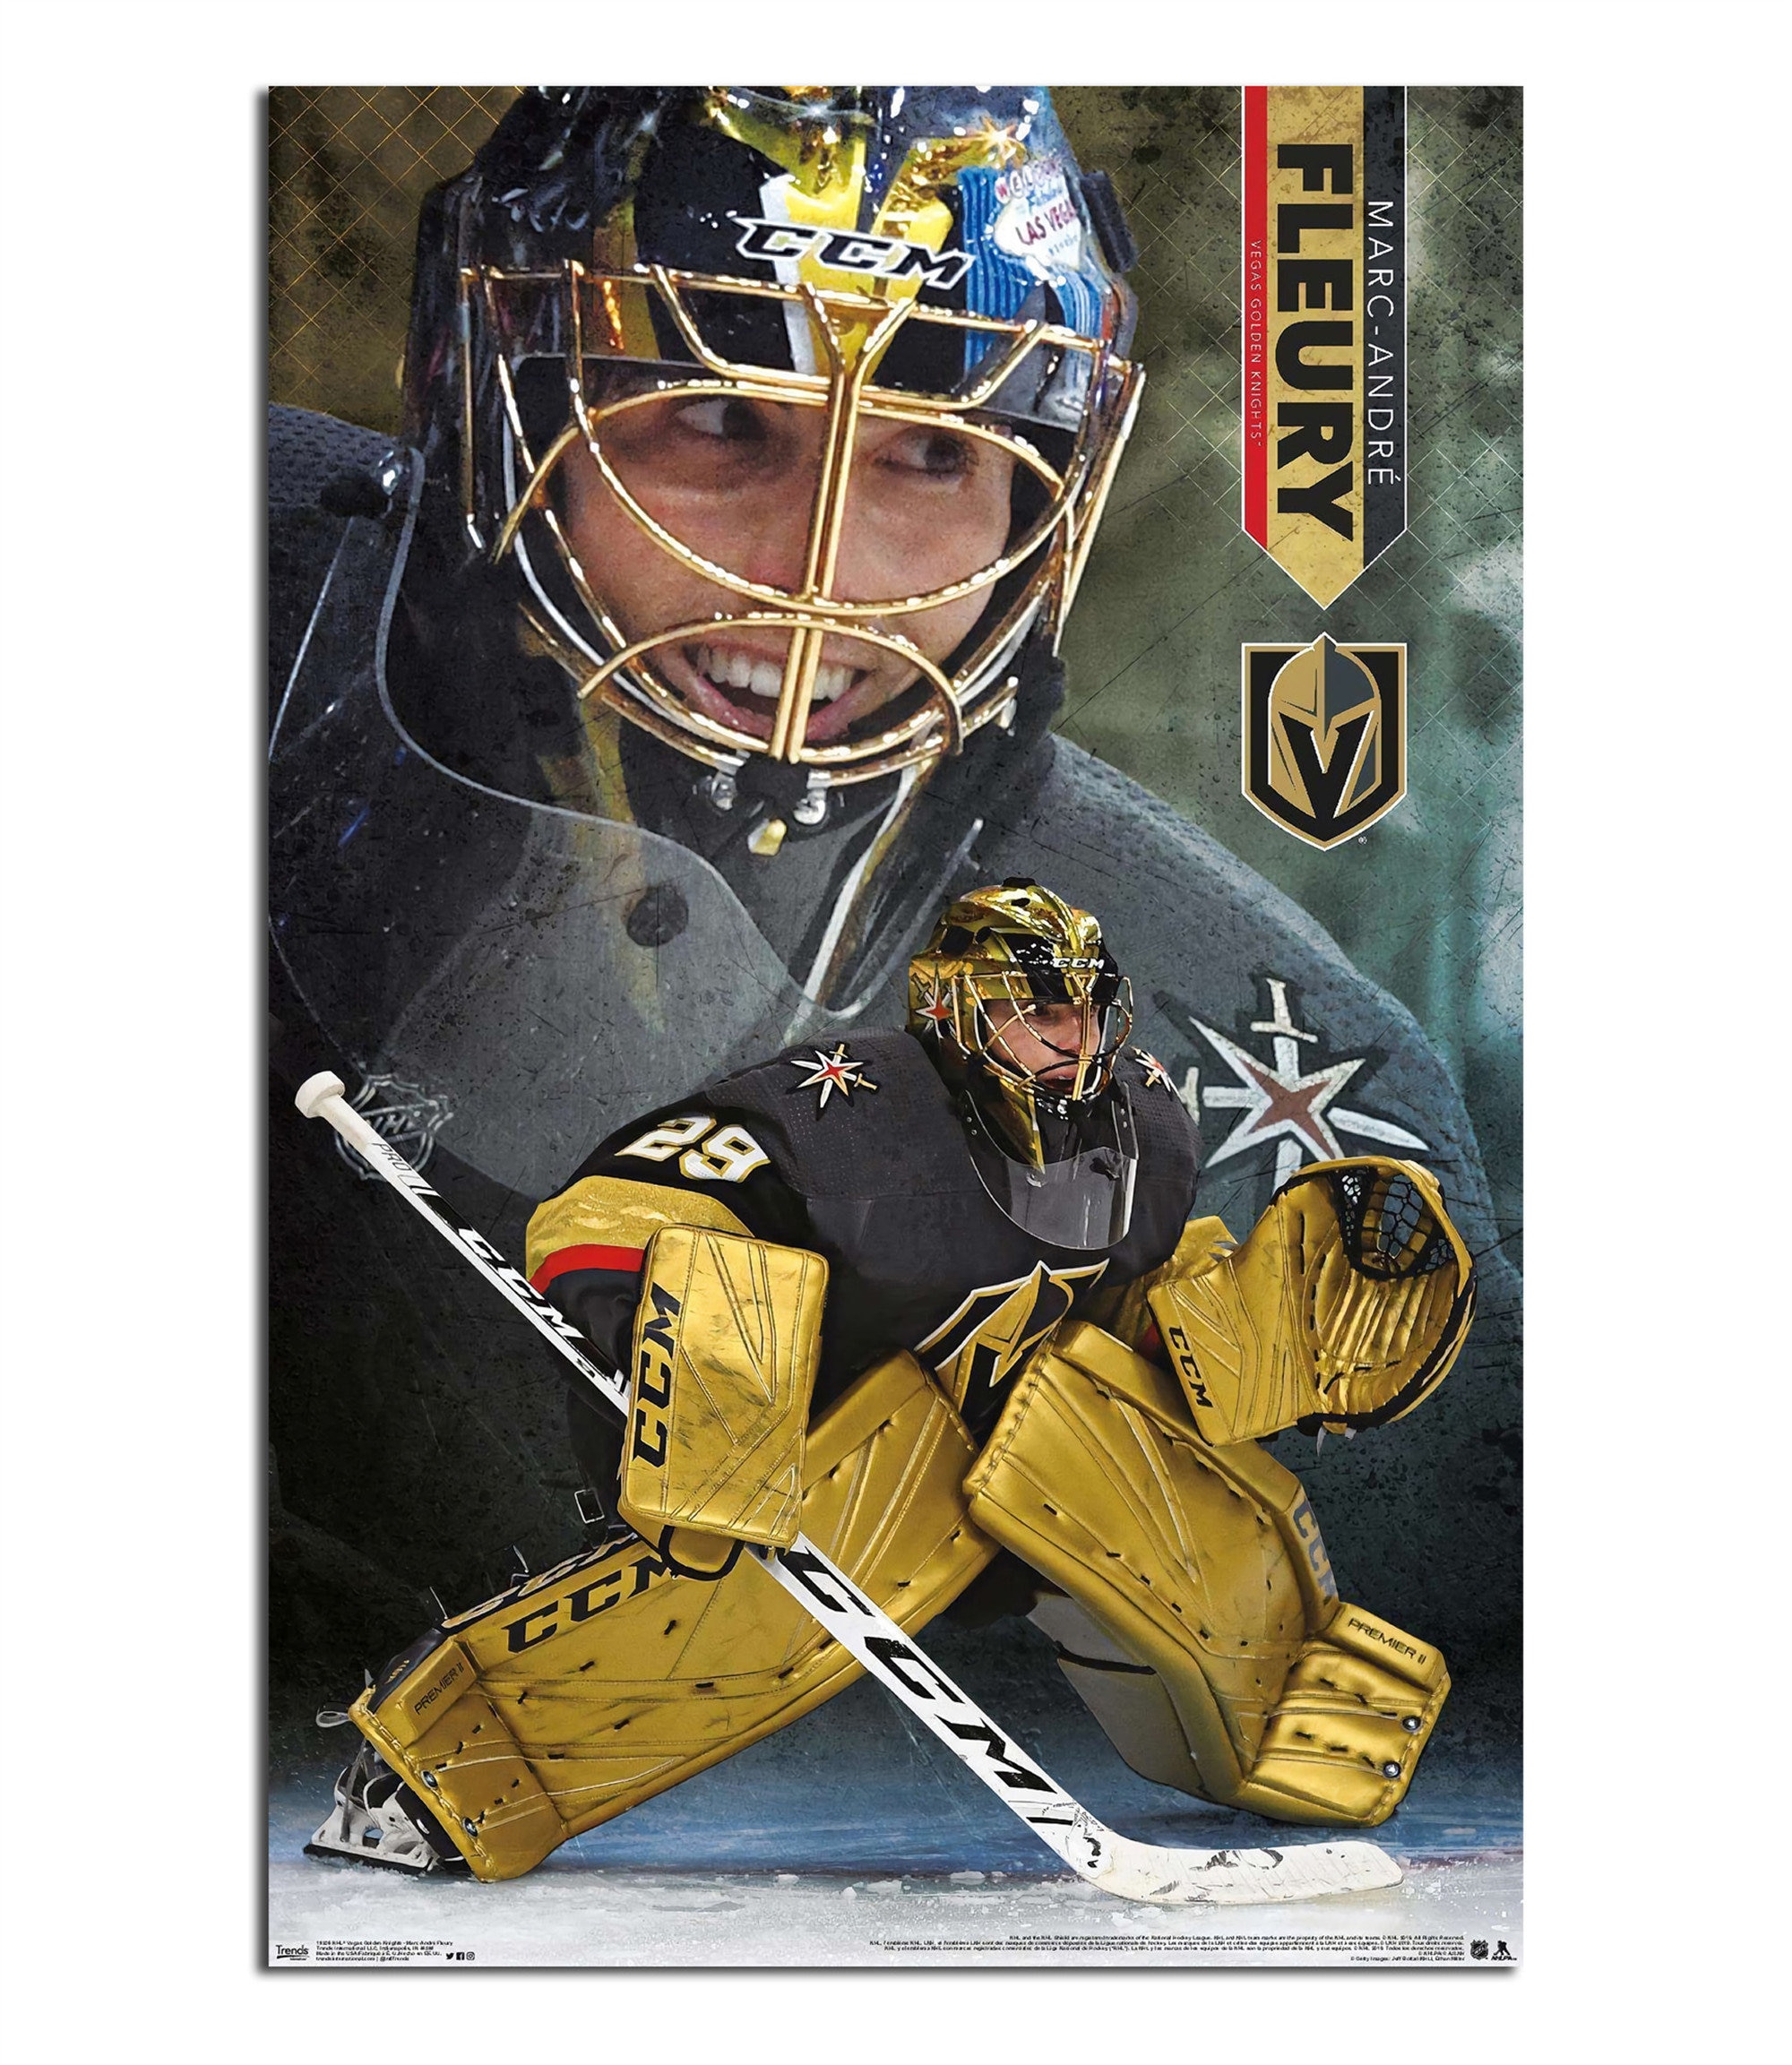 NHL Marc-Andre Fleury Signed Trading Cards, Collectible Marc-Andre